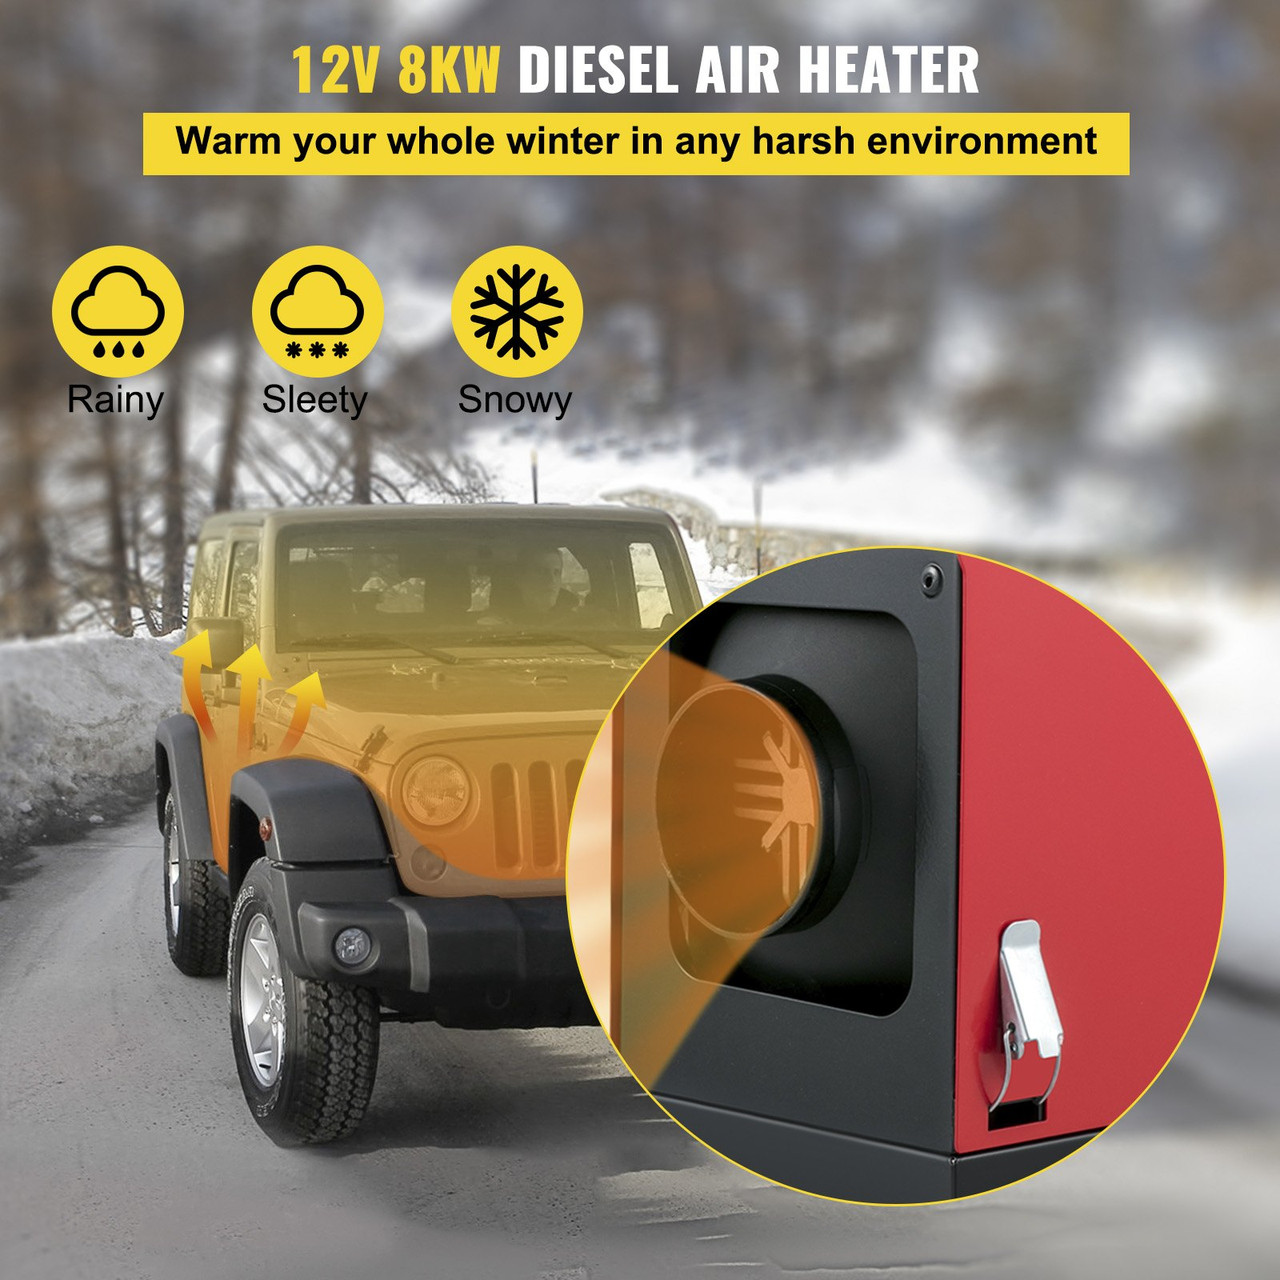 Diesel Air Heater All in One 12V 8KW Parking Heater For Car Trucks